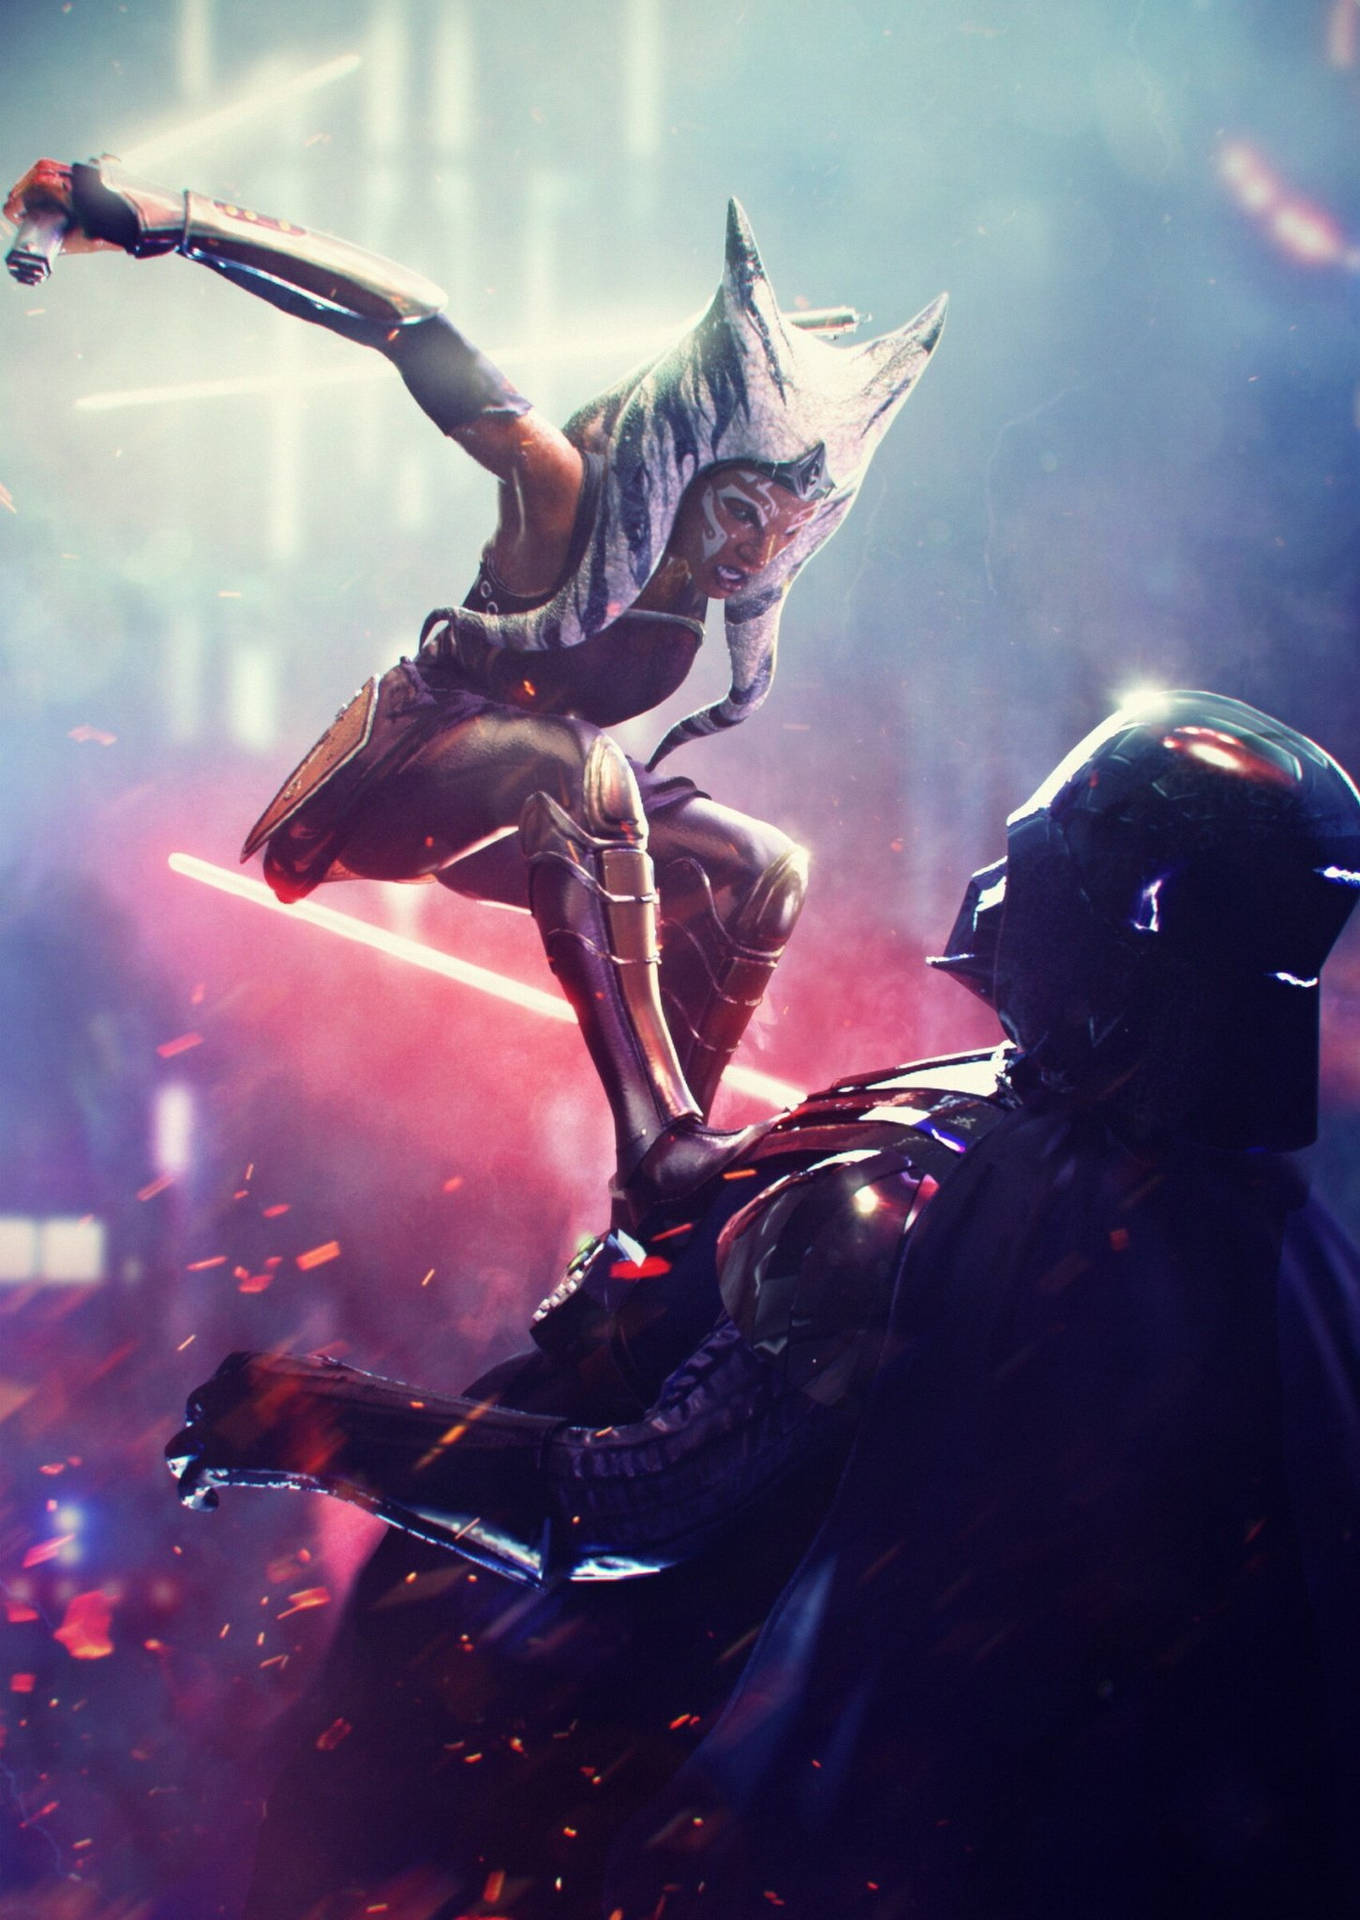 Ahsoka Tano standing with lightsaber at the ready Wallpaper